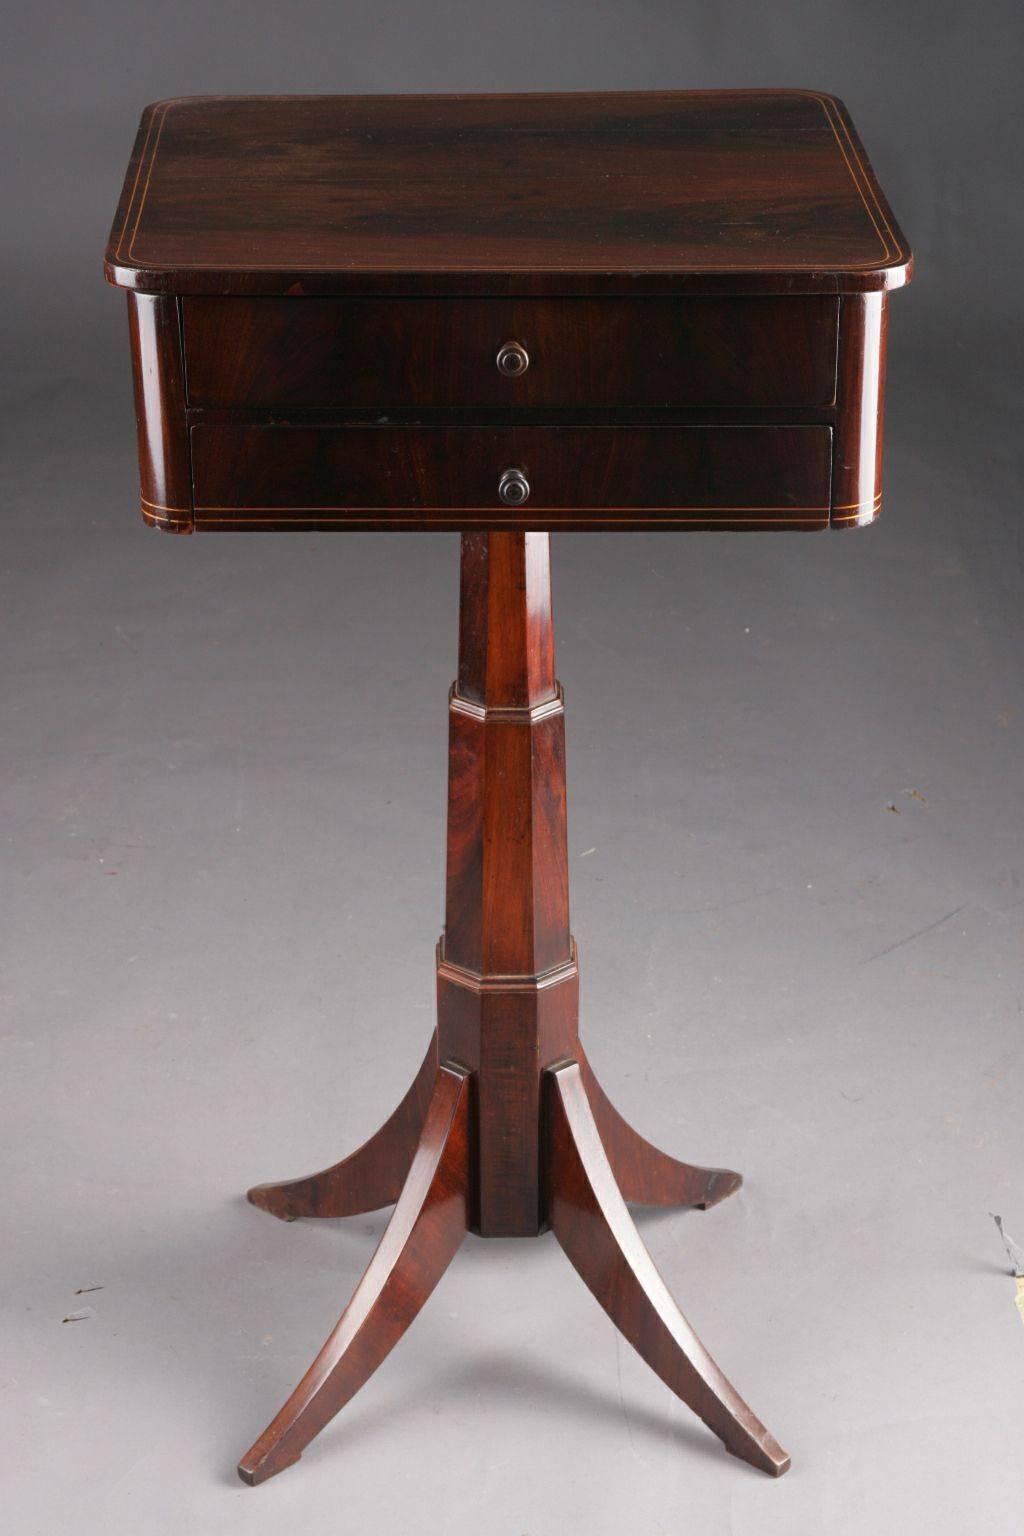 Decent Biedermeier sewing table, circa 1825.
Mahogany on solid softwood. Straight, two-handed frame box on a telescopic column on saber-shaped legs. Filament and ribbon inlays. Four-sided tabletop in compartments for sewing utensils.

(G-27).